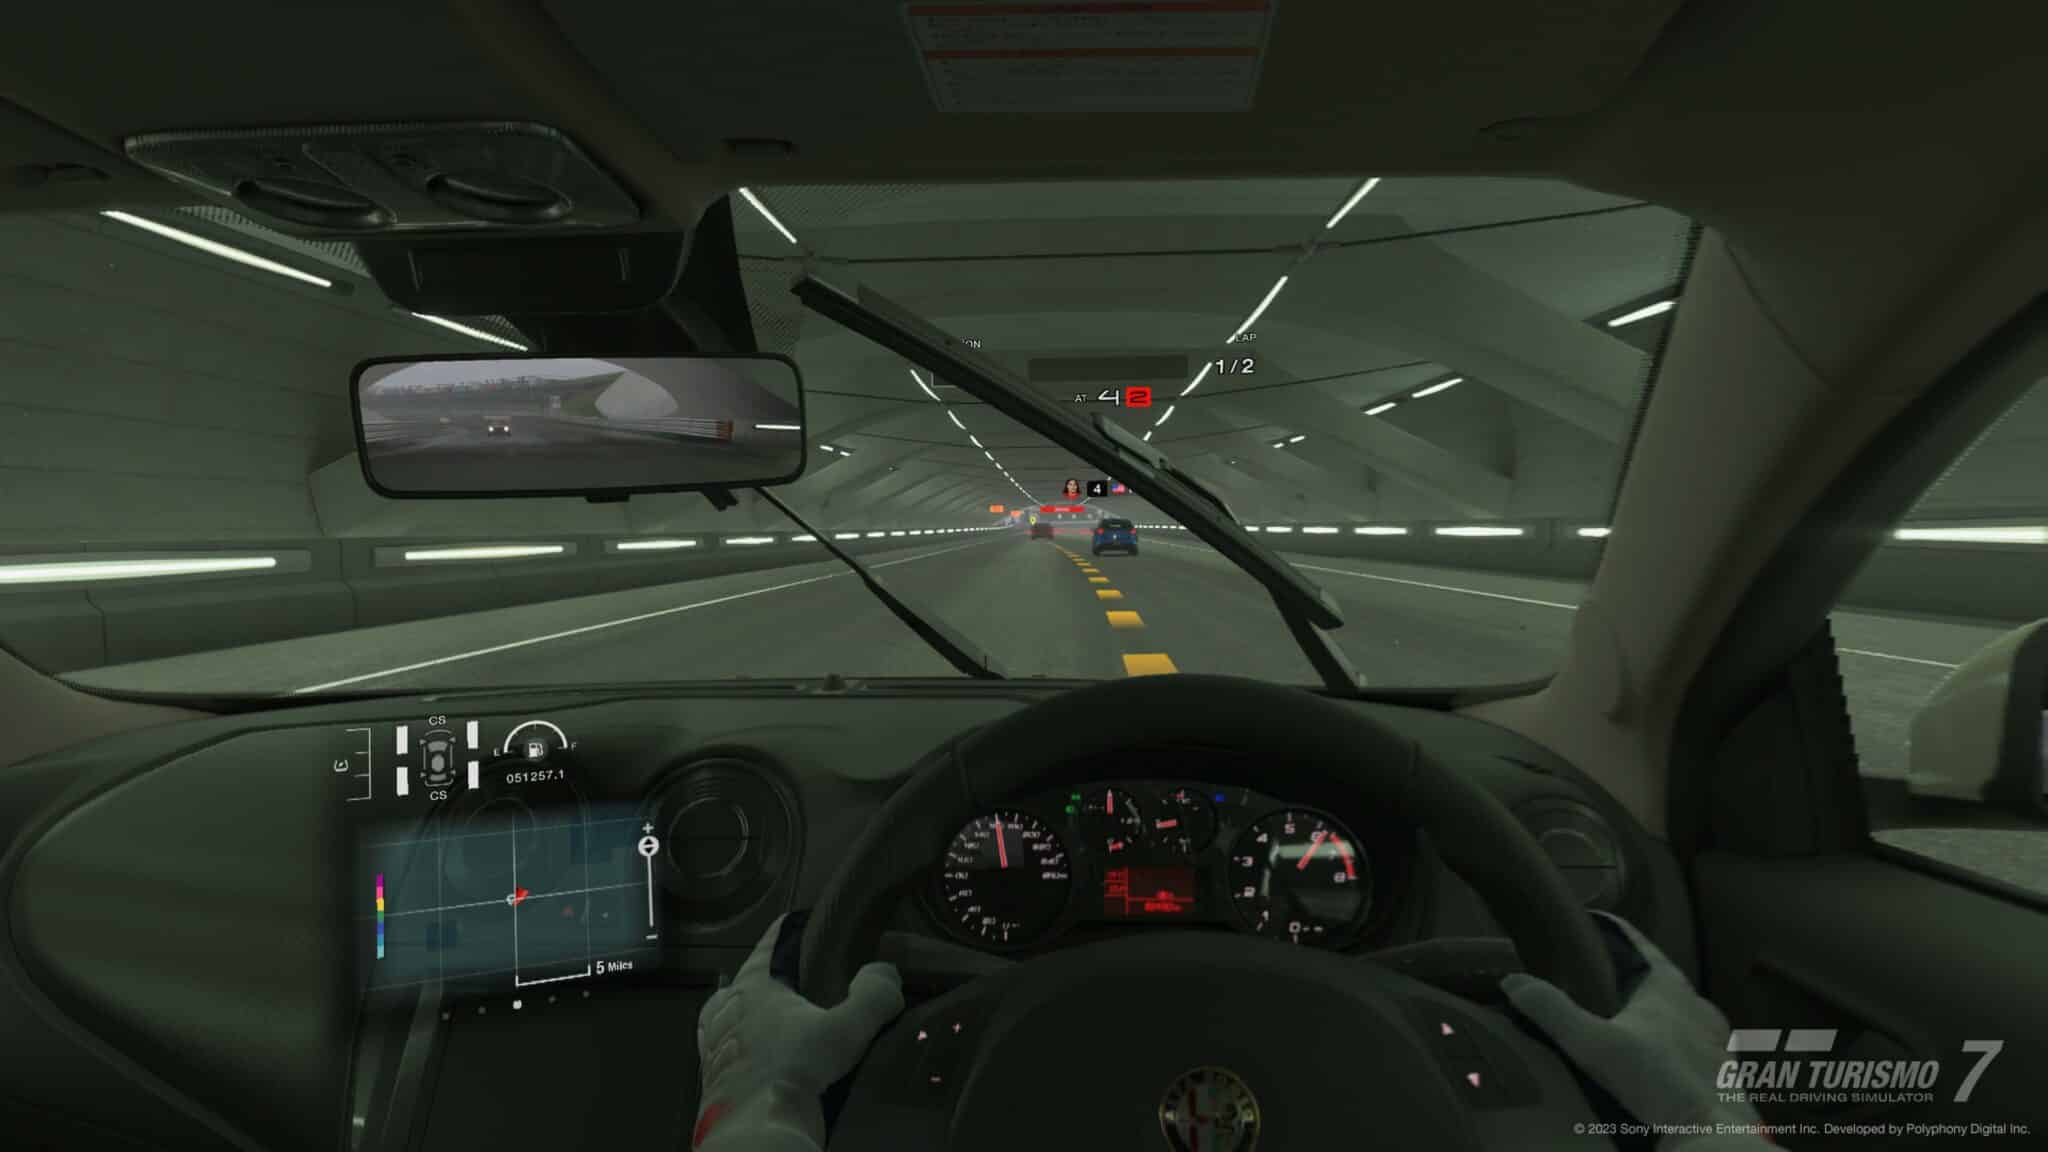 Hands-on: Why Gran Turismo 7 is a must-have PSVR2 title